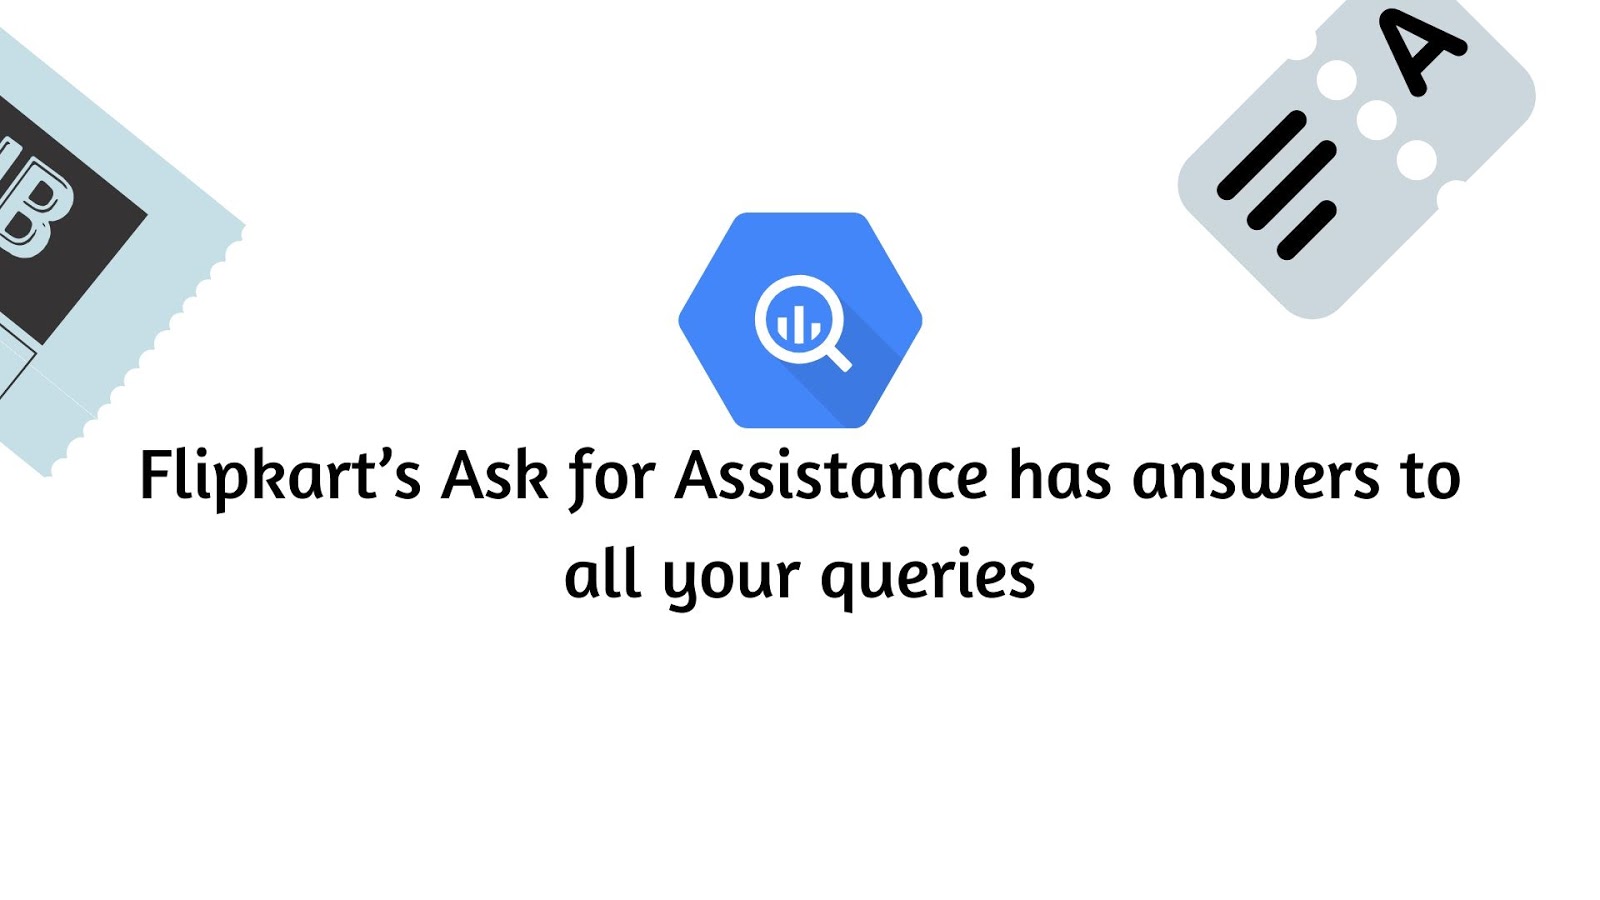 Flipkart’s Ask for Assistance has answers to all your queries,flipkart,flipkart canada,flipkart seller,flipkart seller,flipkart seller login,flipkart seller login,selling flipkart,seller flipkart central,online seller,my orders on flipkart,business with flipkart,flipkart business,flipkart selling fees,products in flipkart